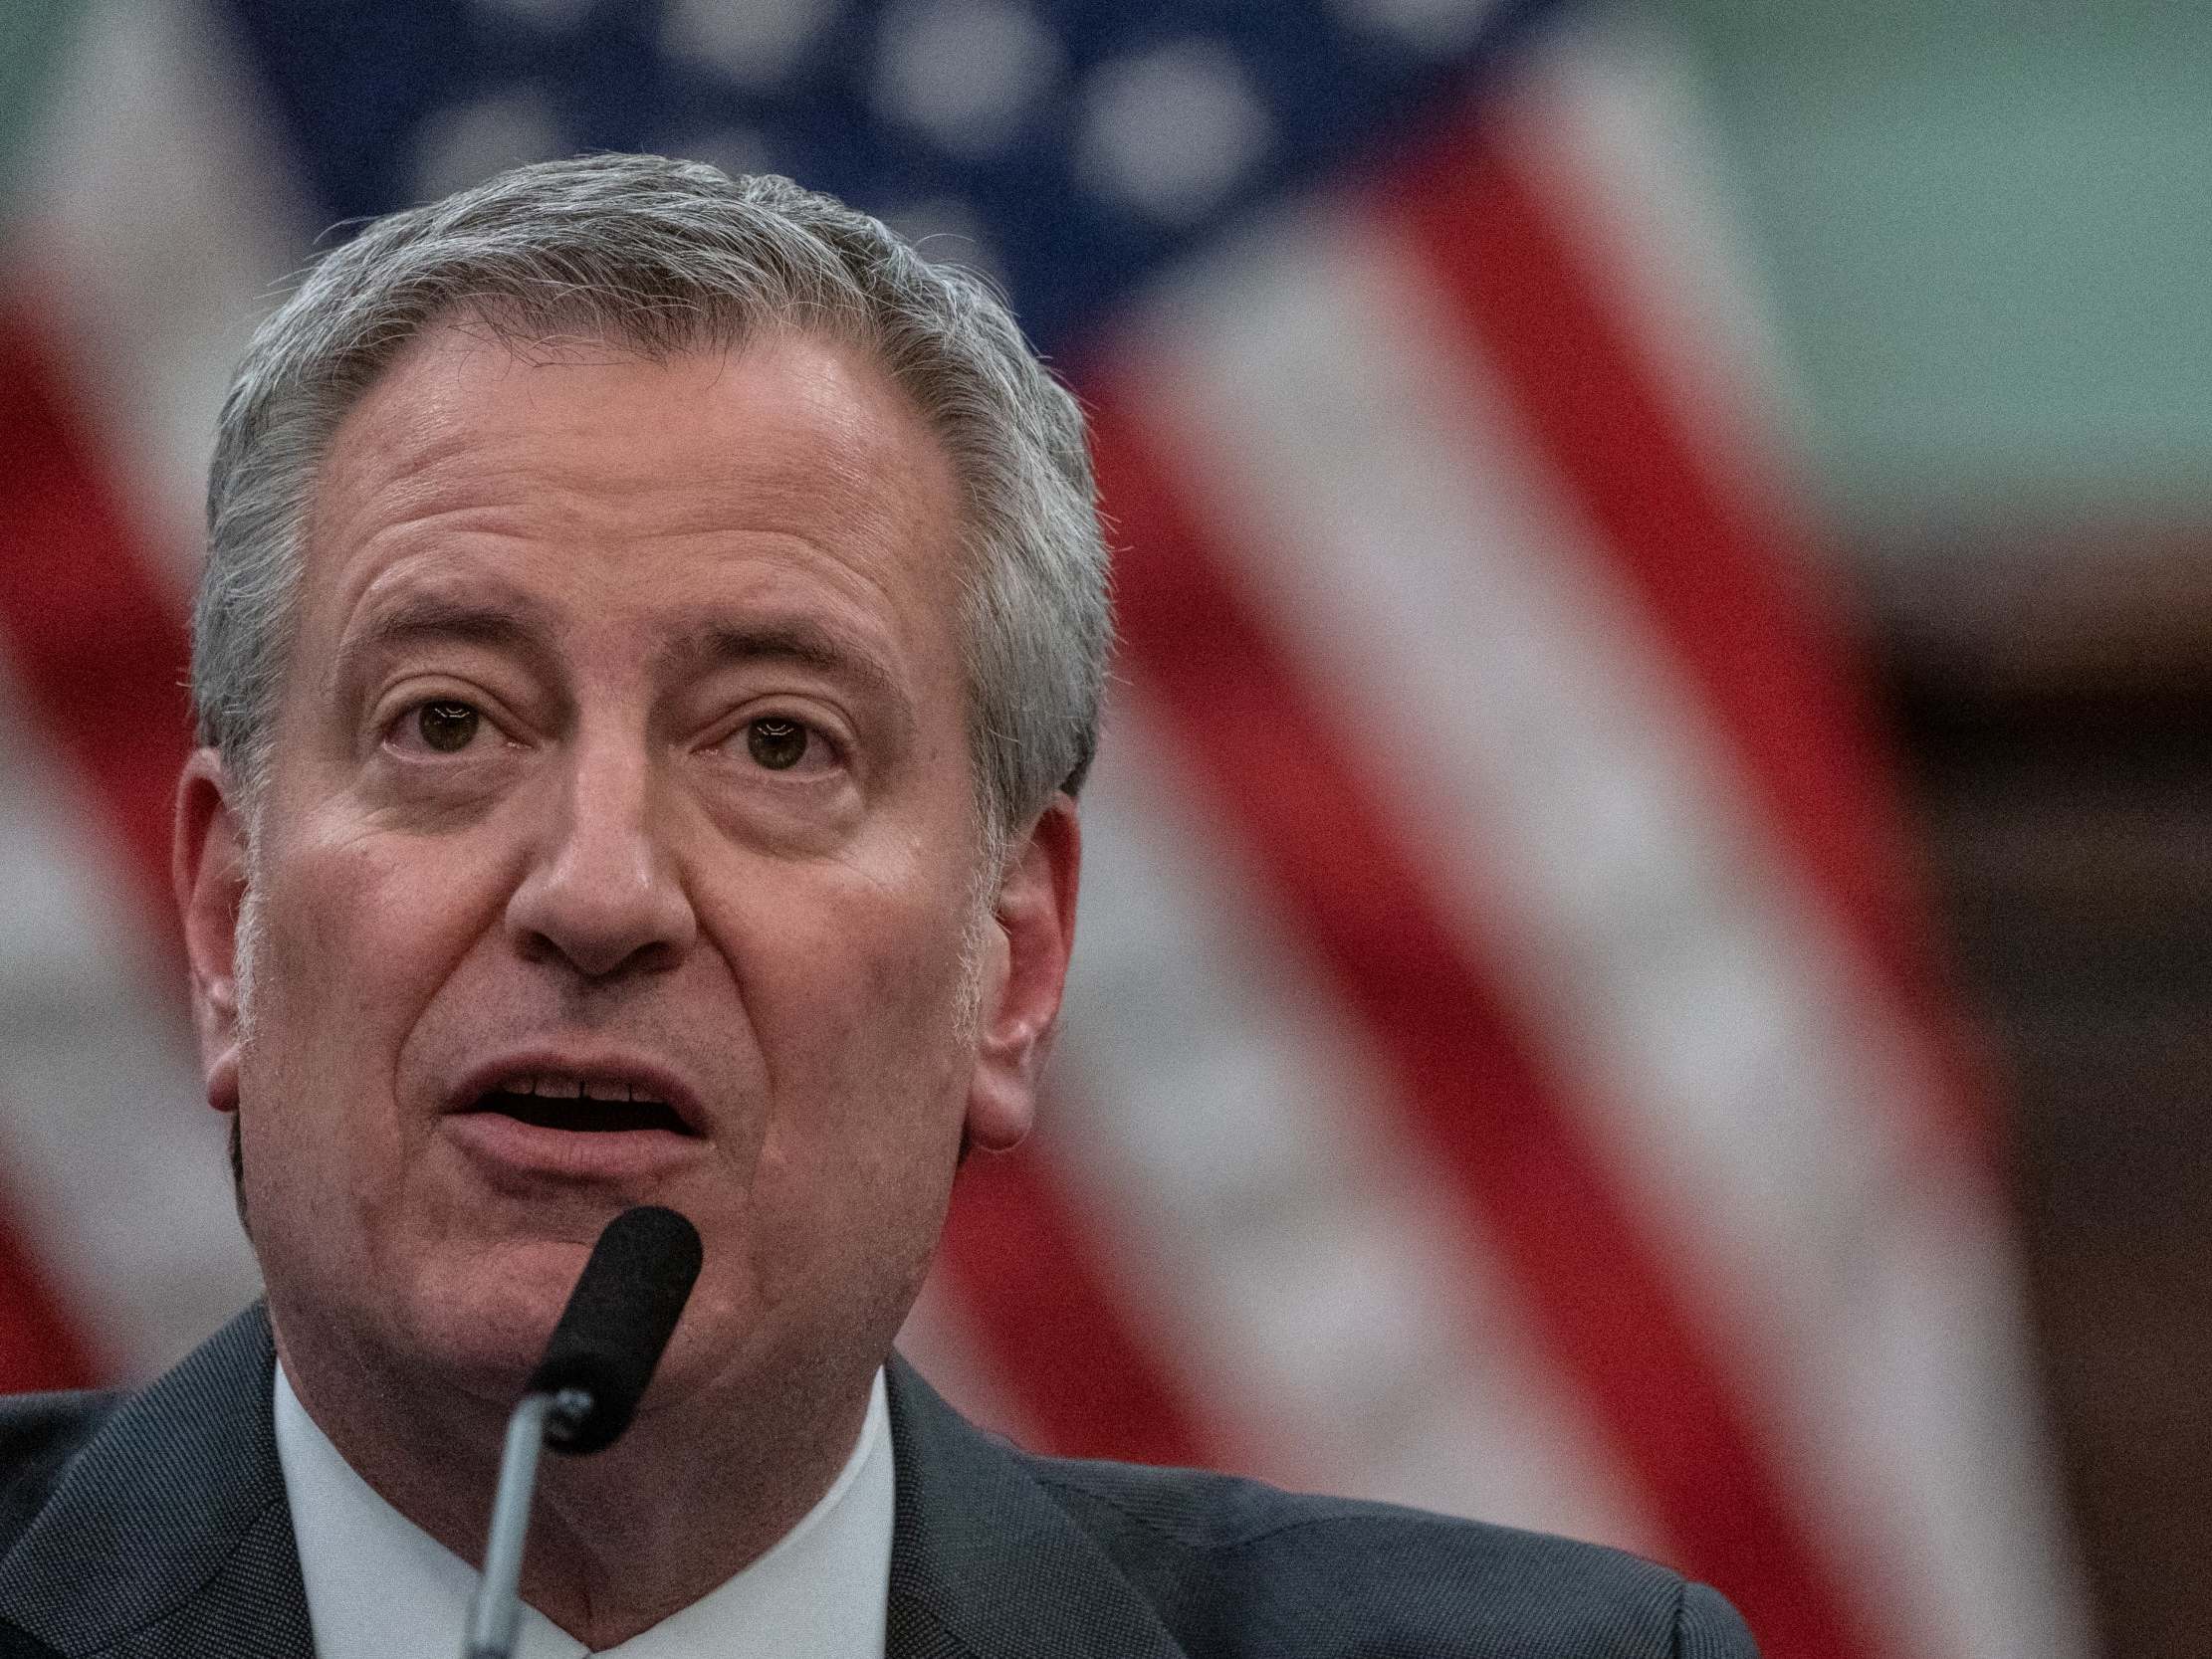 New York City Mayor, Bill de Blasio, announced on Wednesday that cases in the city had doubled